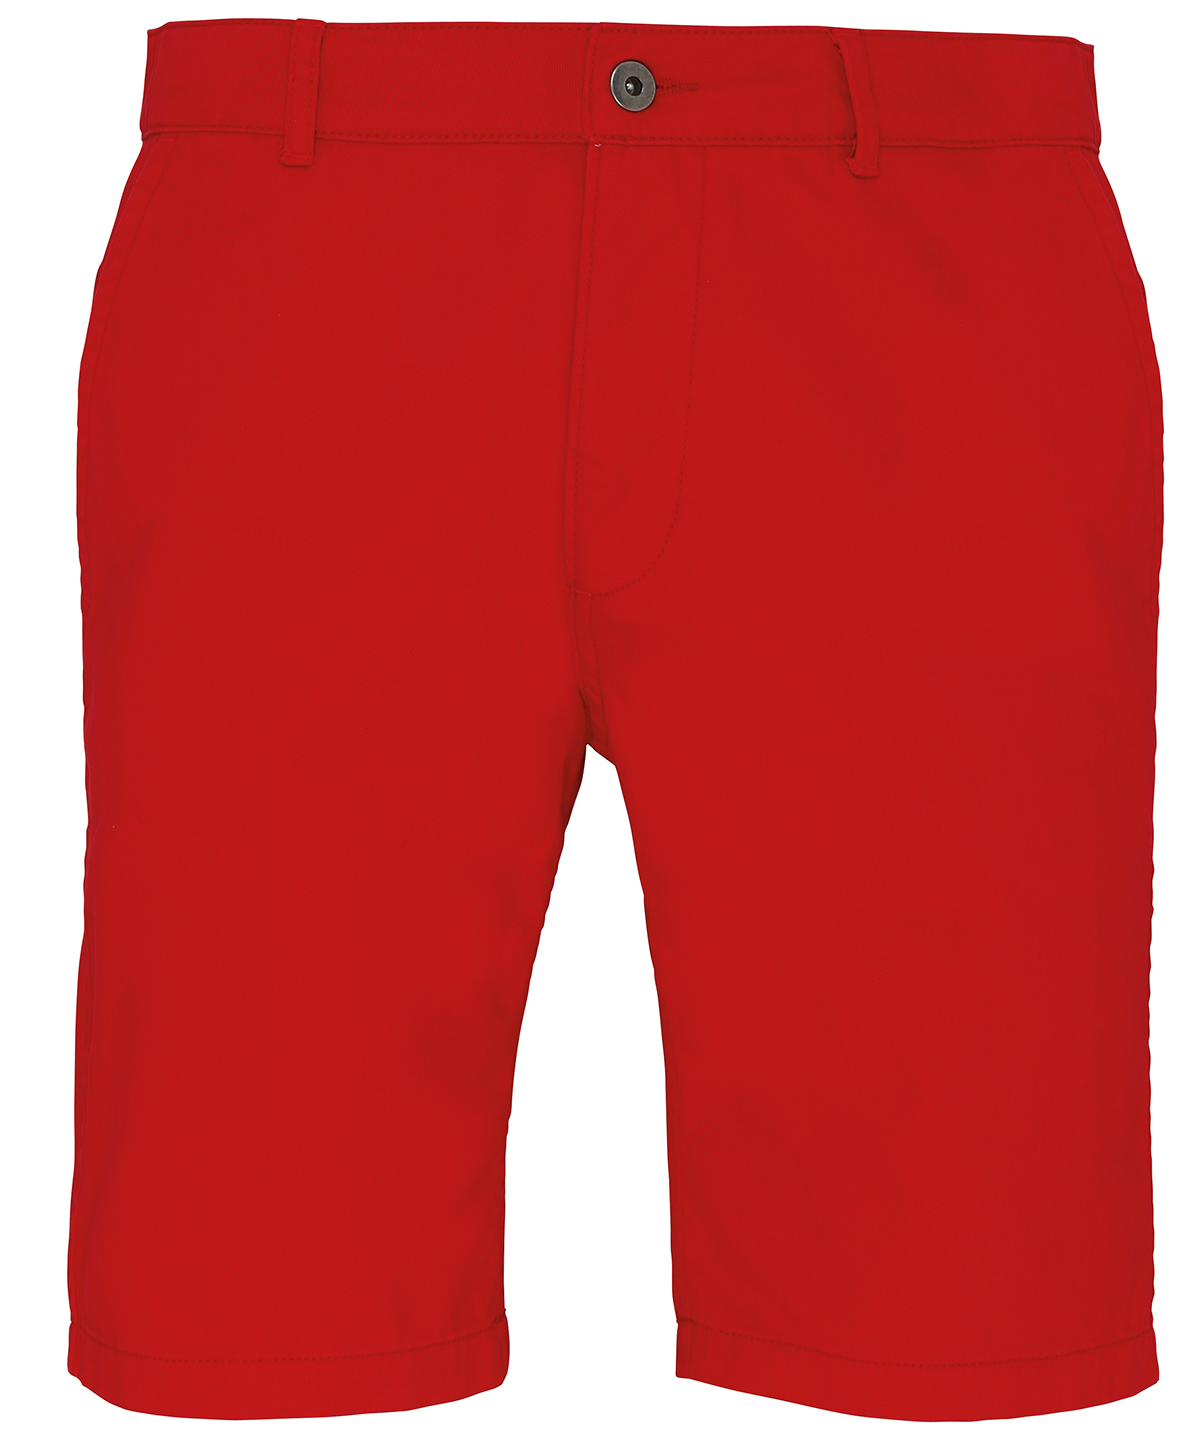 Mens Chino Shorts Cherry Red Size 3XLarge